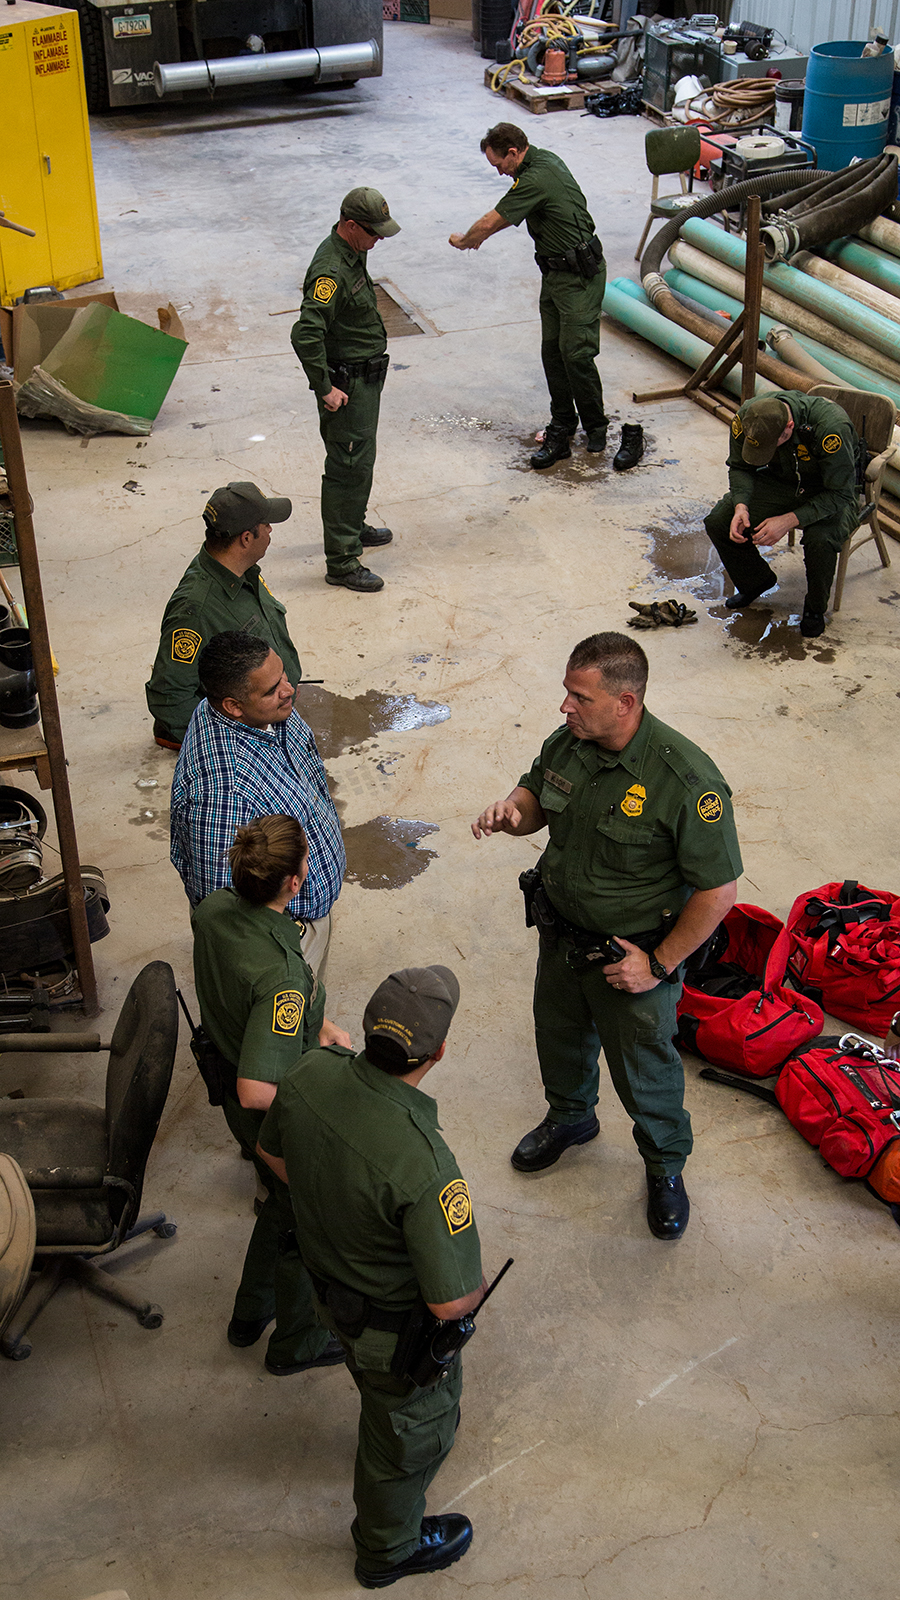 A photo showing Border Patrol agents gathering after exploring. the tunnel